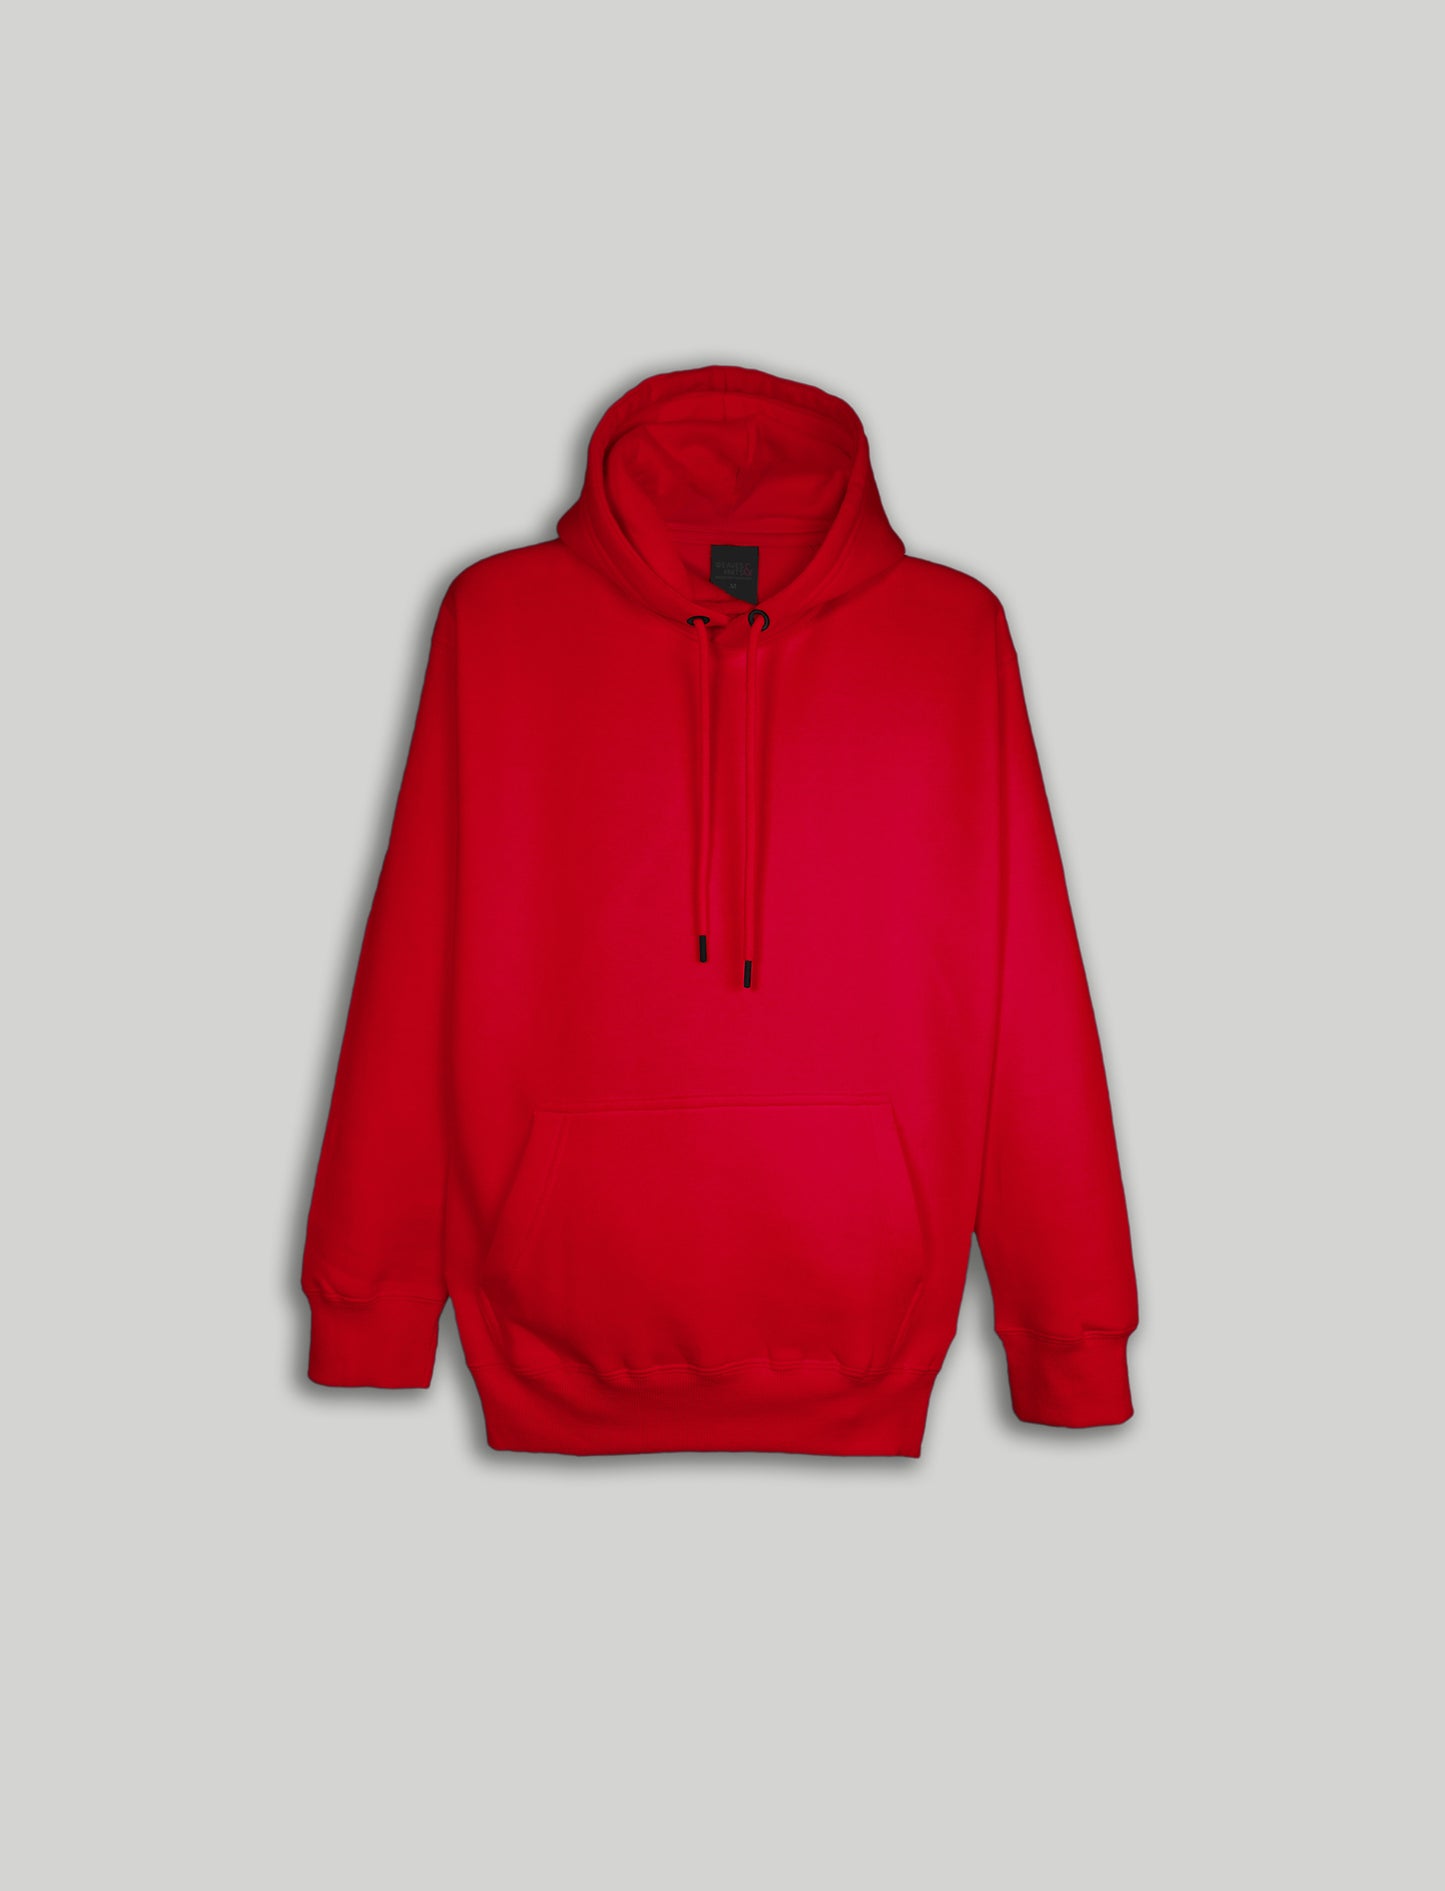 High Quality Red Fleece Hoodie - Weaves & Knits